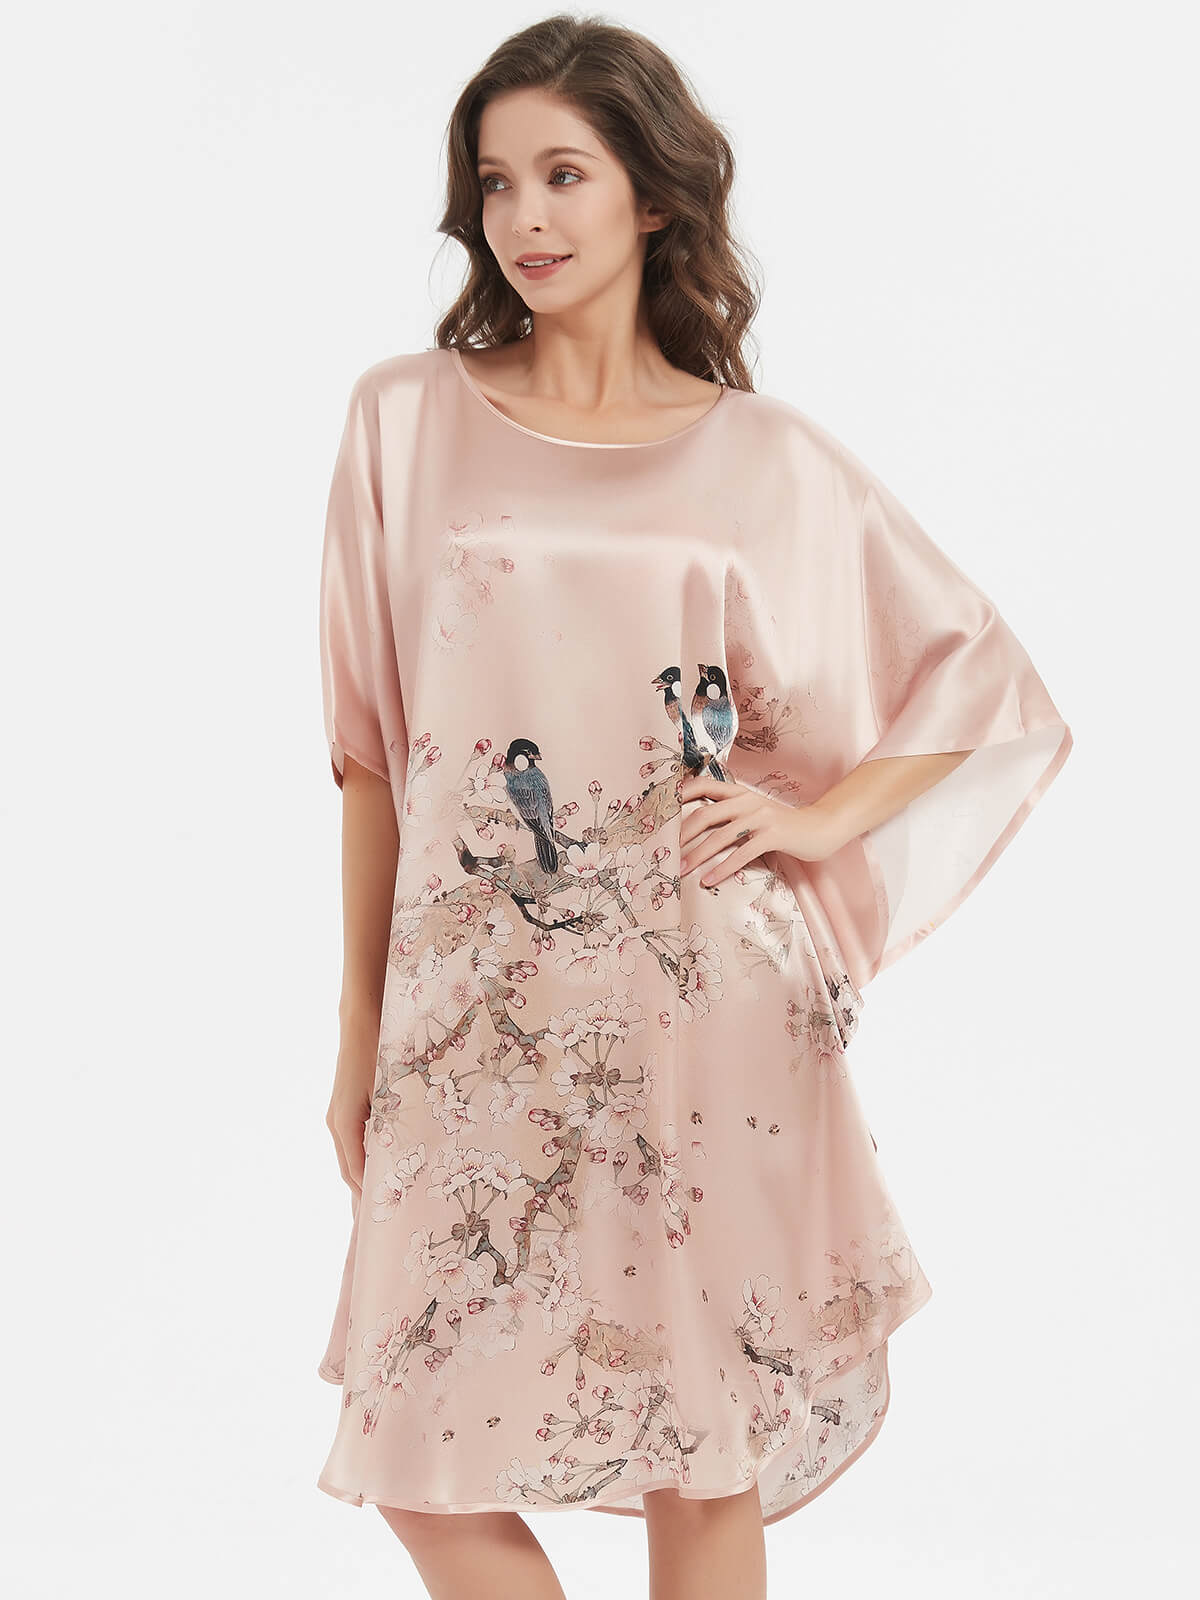 19 Momme Champagne Floral Printed Silk Caftan Nightdress